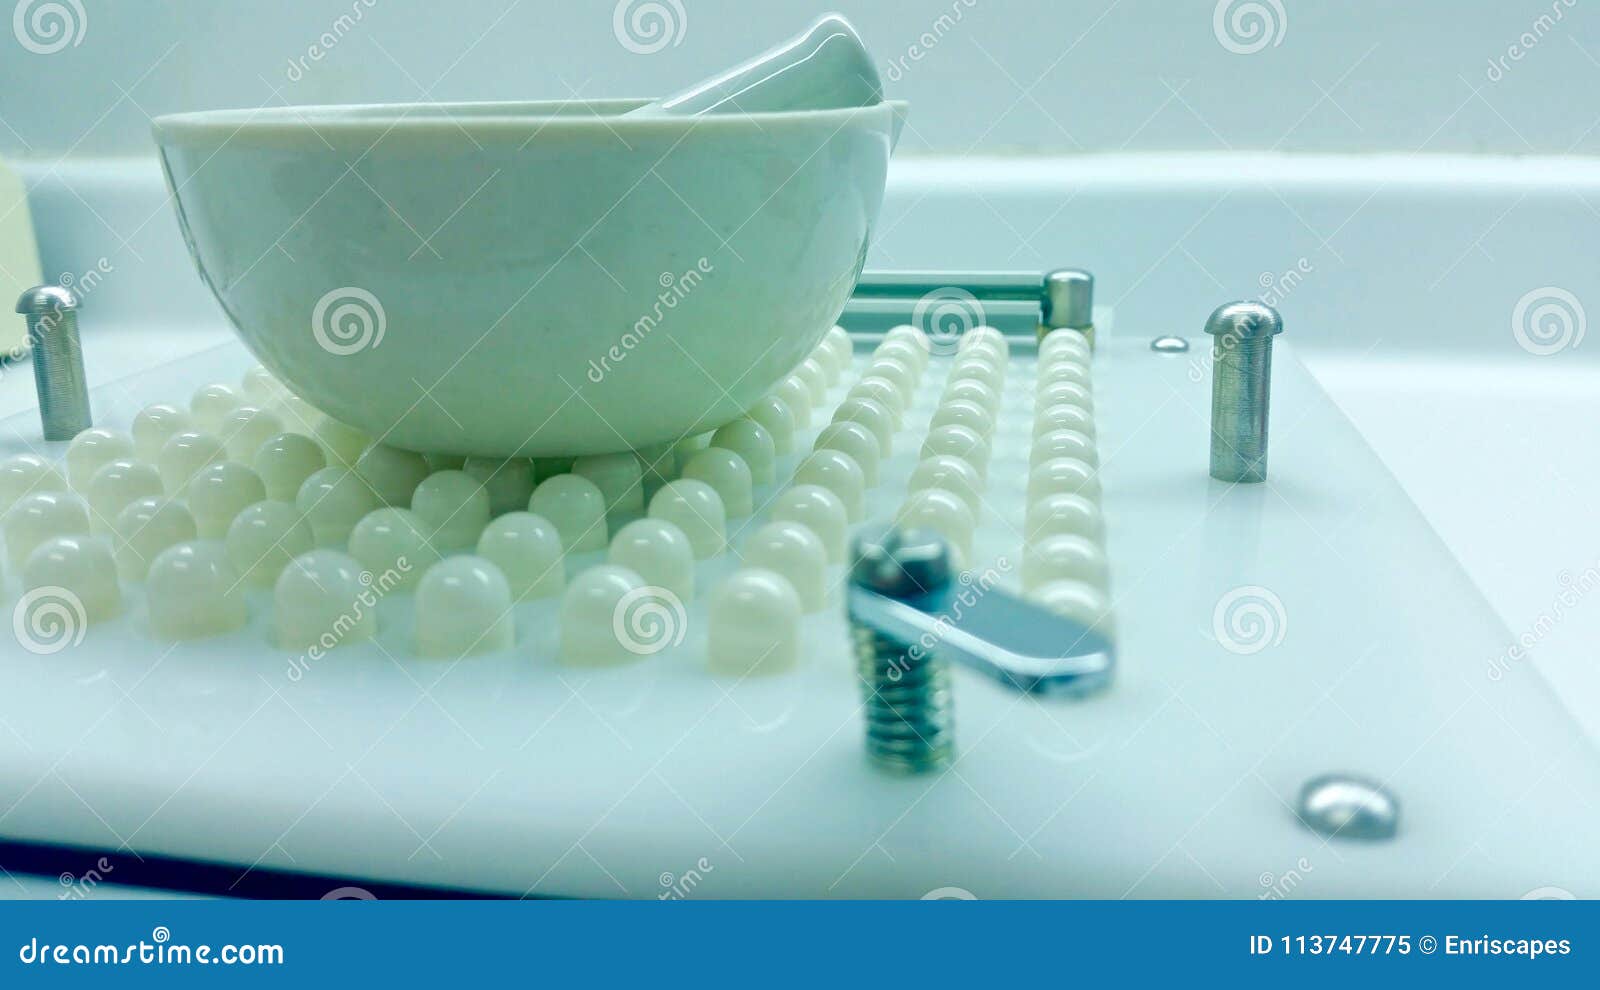 capsules compounding in the pharmacy laboratory